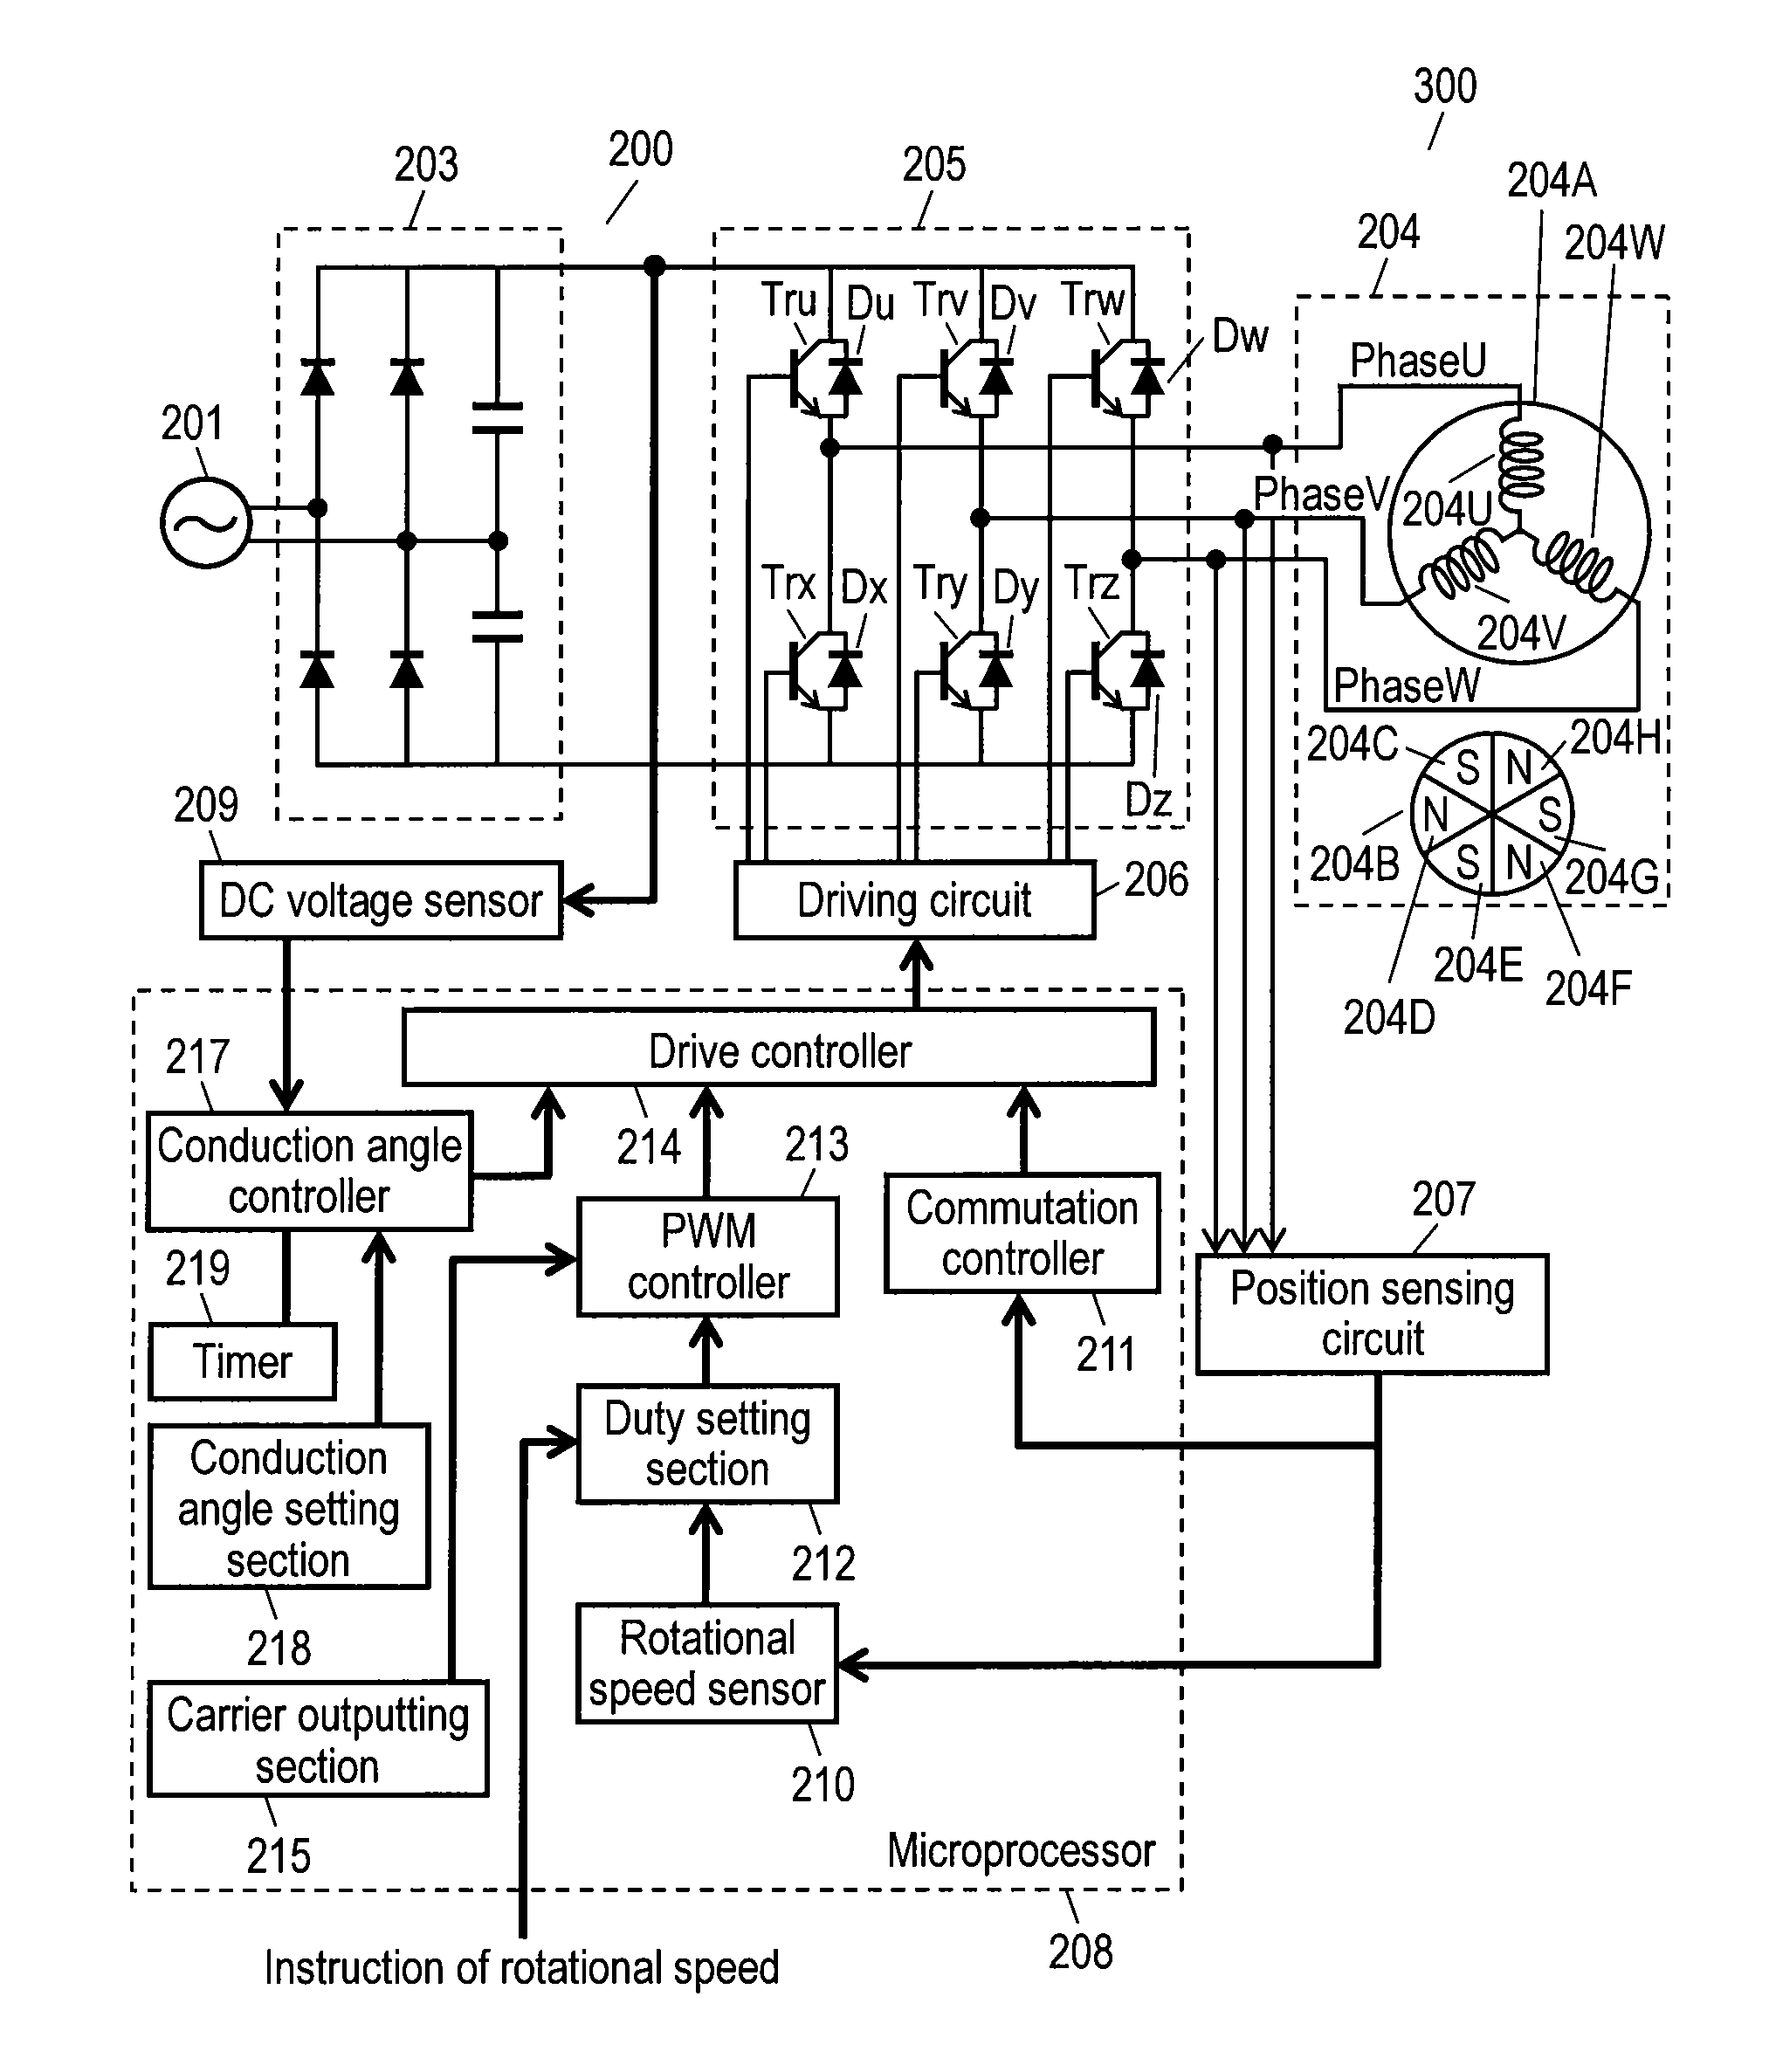 Conduction angle control of brushless motor